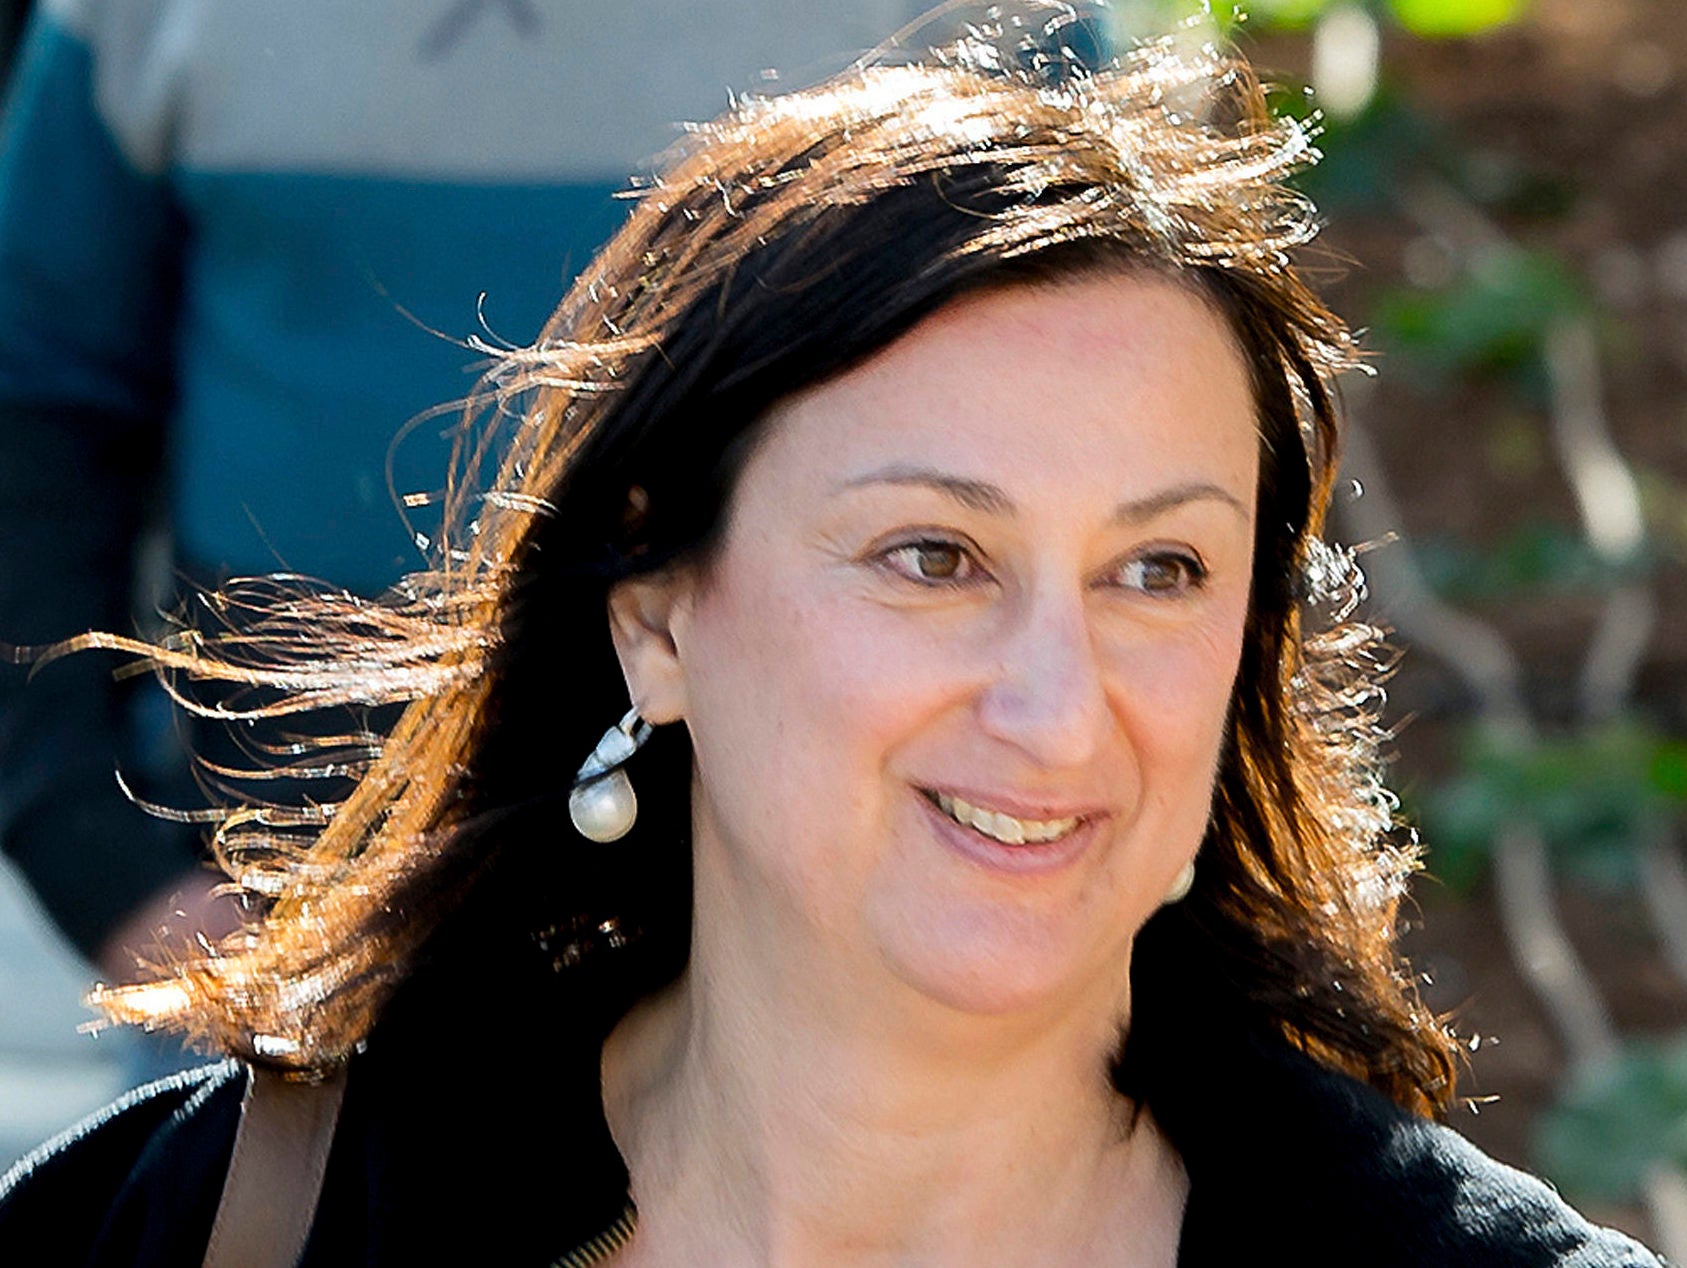 Family of murdered journalist Daphne Caruana Galizia could sue Maltese Government if public inquiry into her death does not go ahead